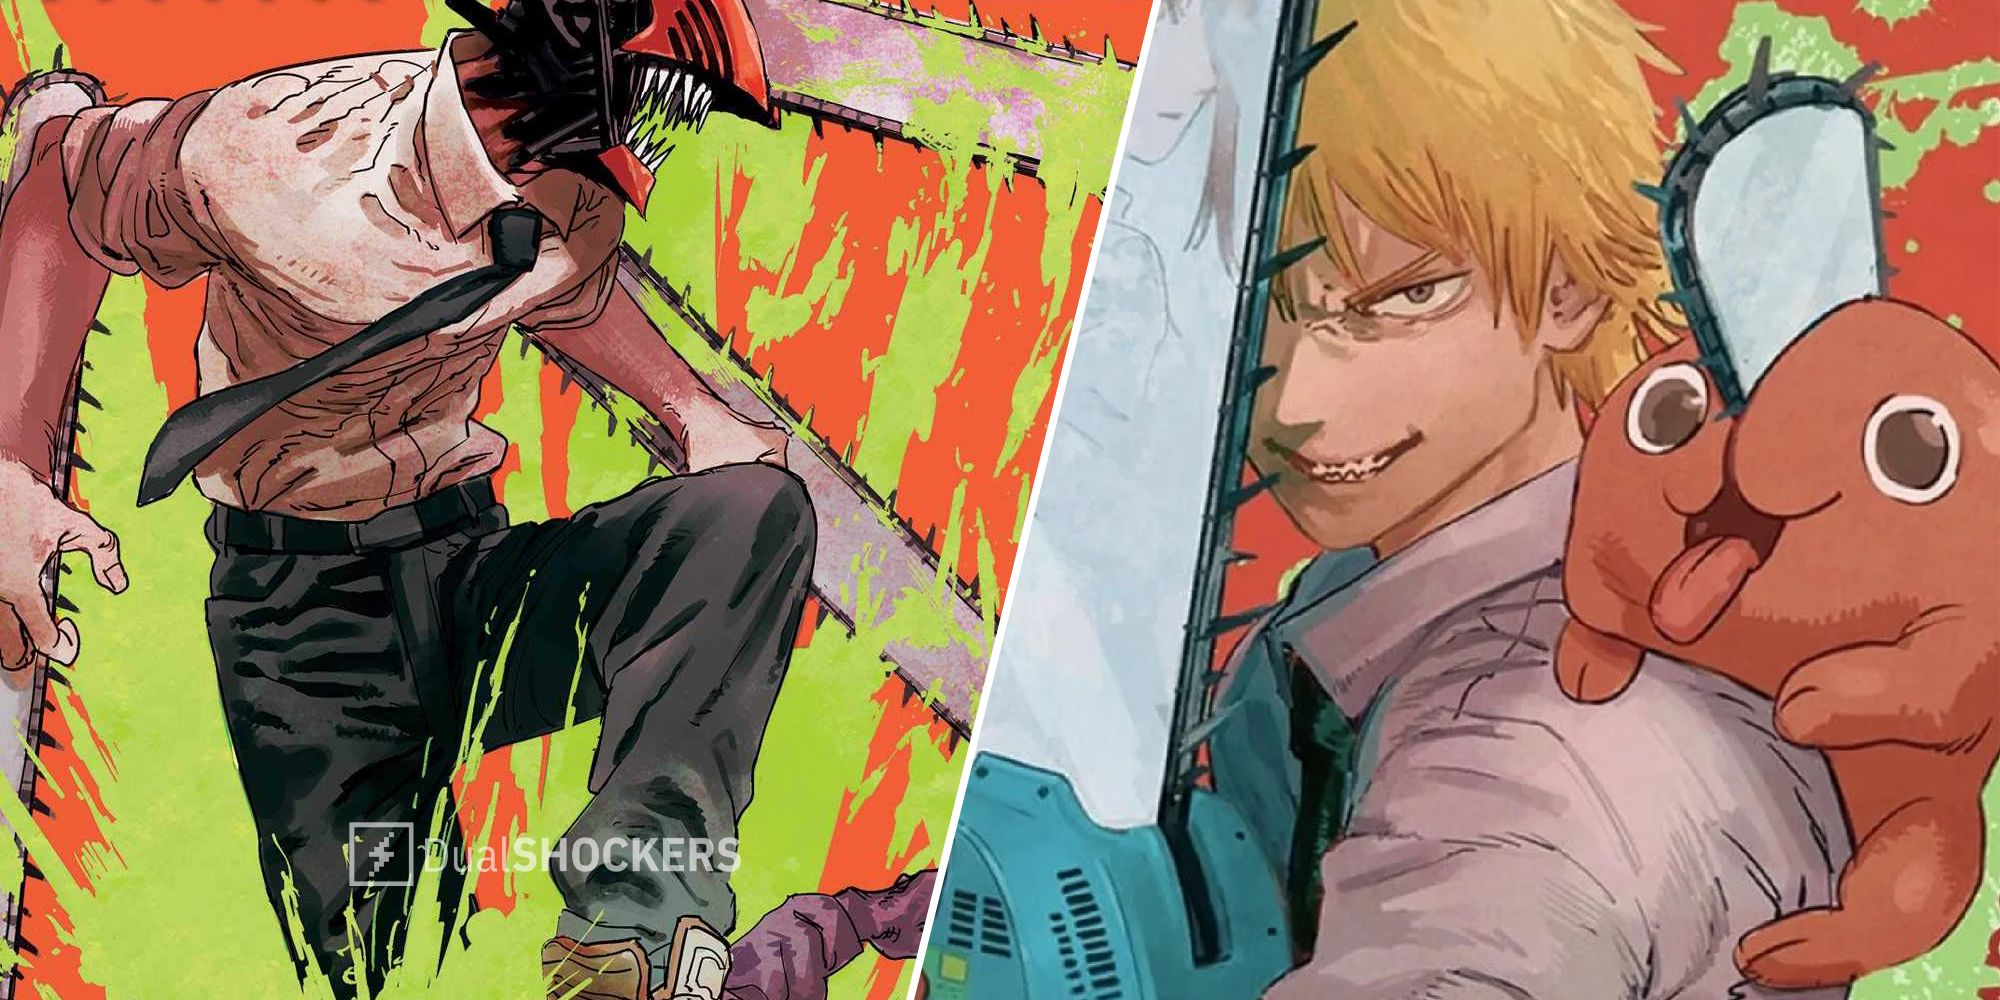 Chainsaw Man: 15 Interesting Facts About The Manga Series